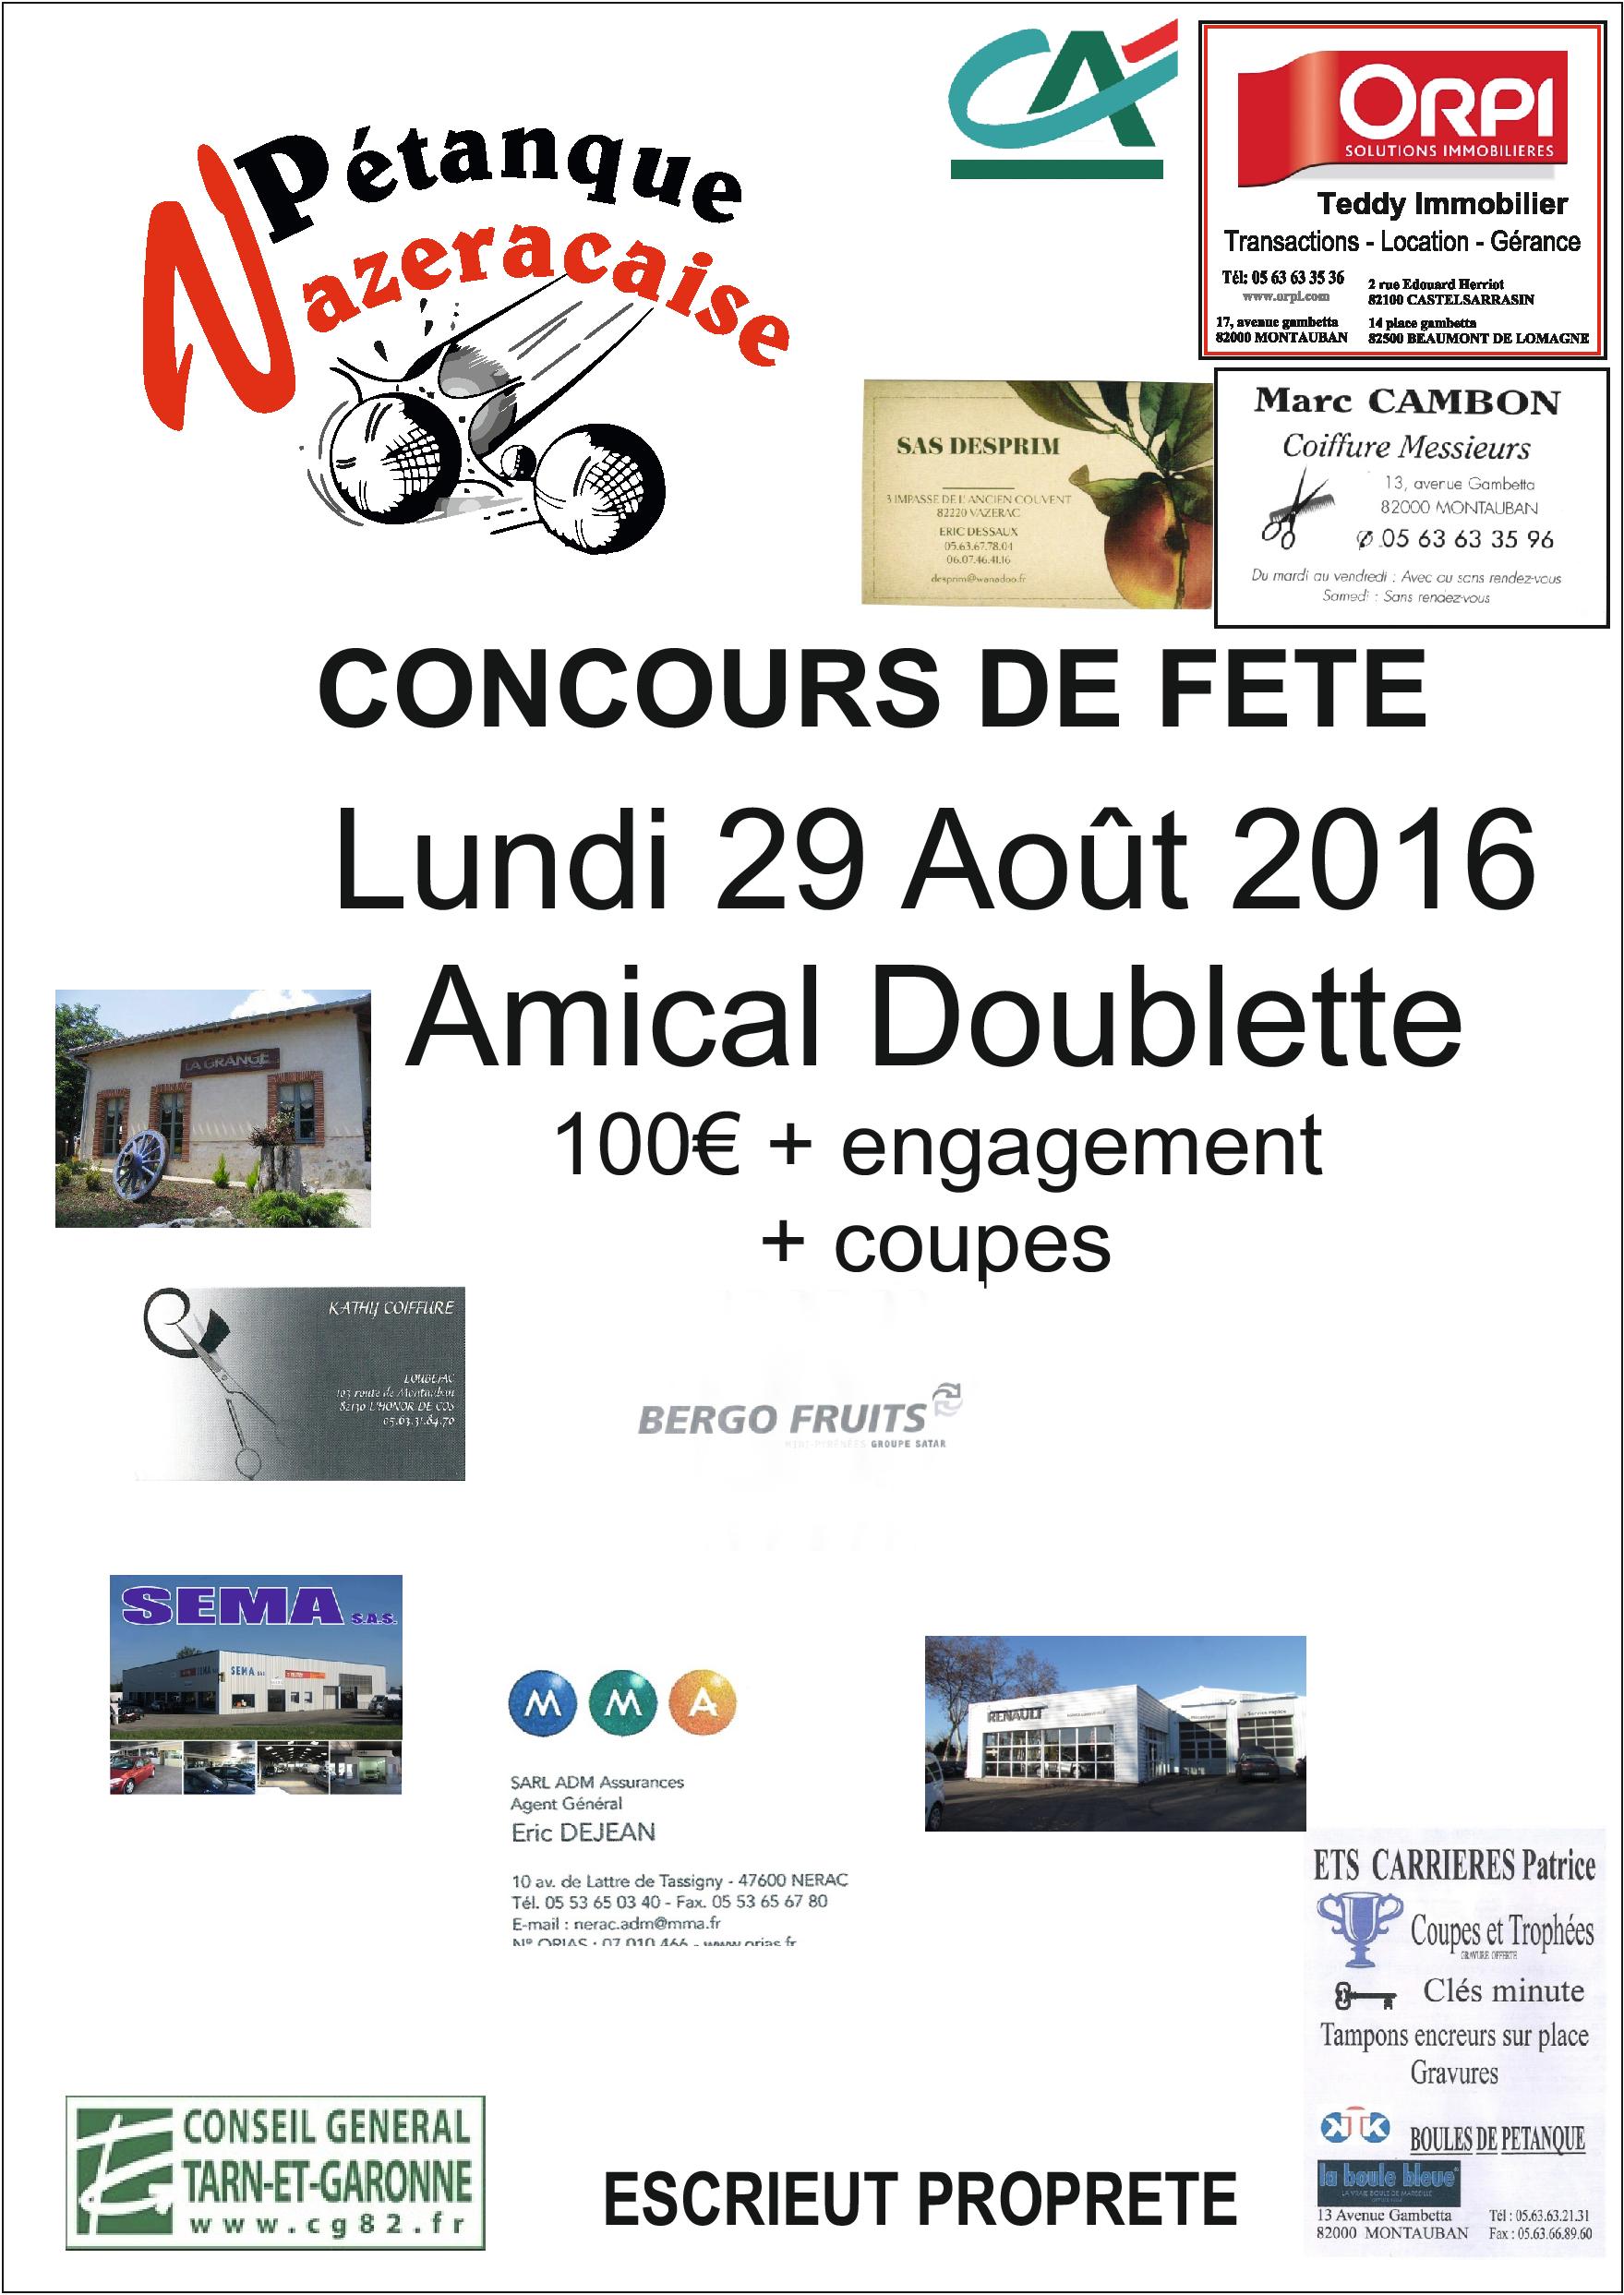 Concours amical lundi 29 aout 2016.